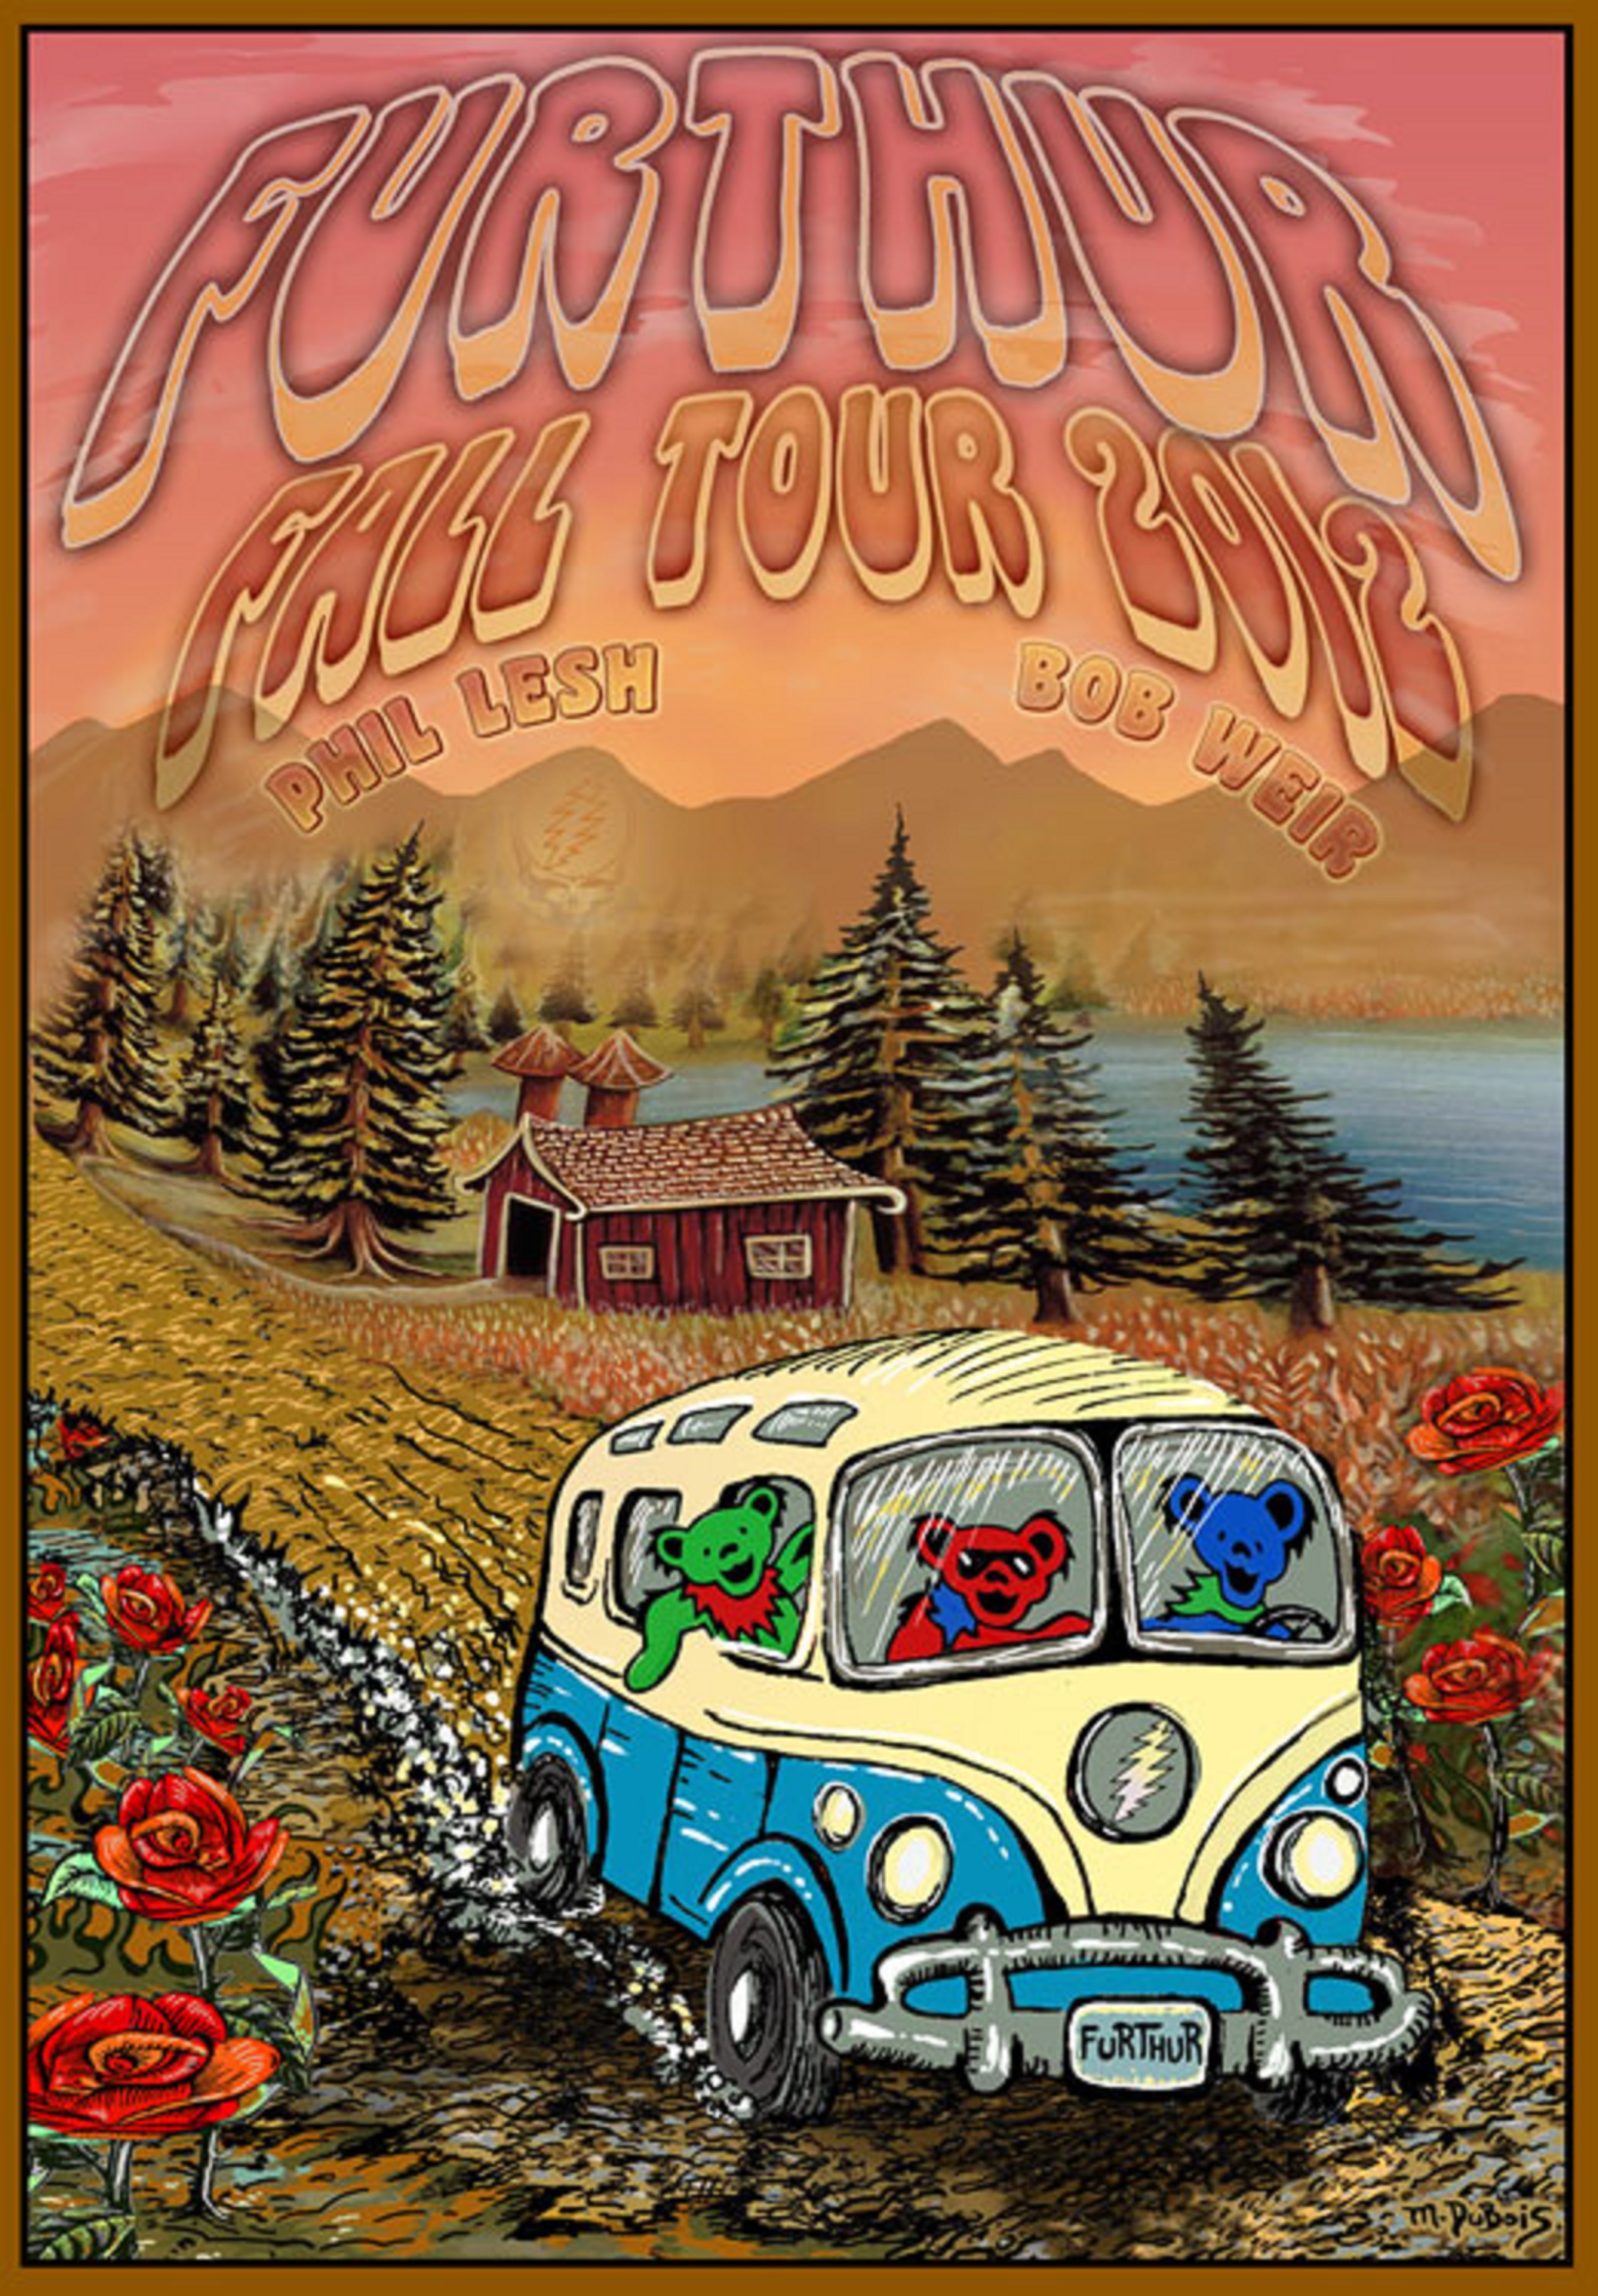 Furthur Announces Fall Shows at Red Rocks, Seattle, Mountain View